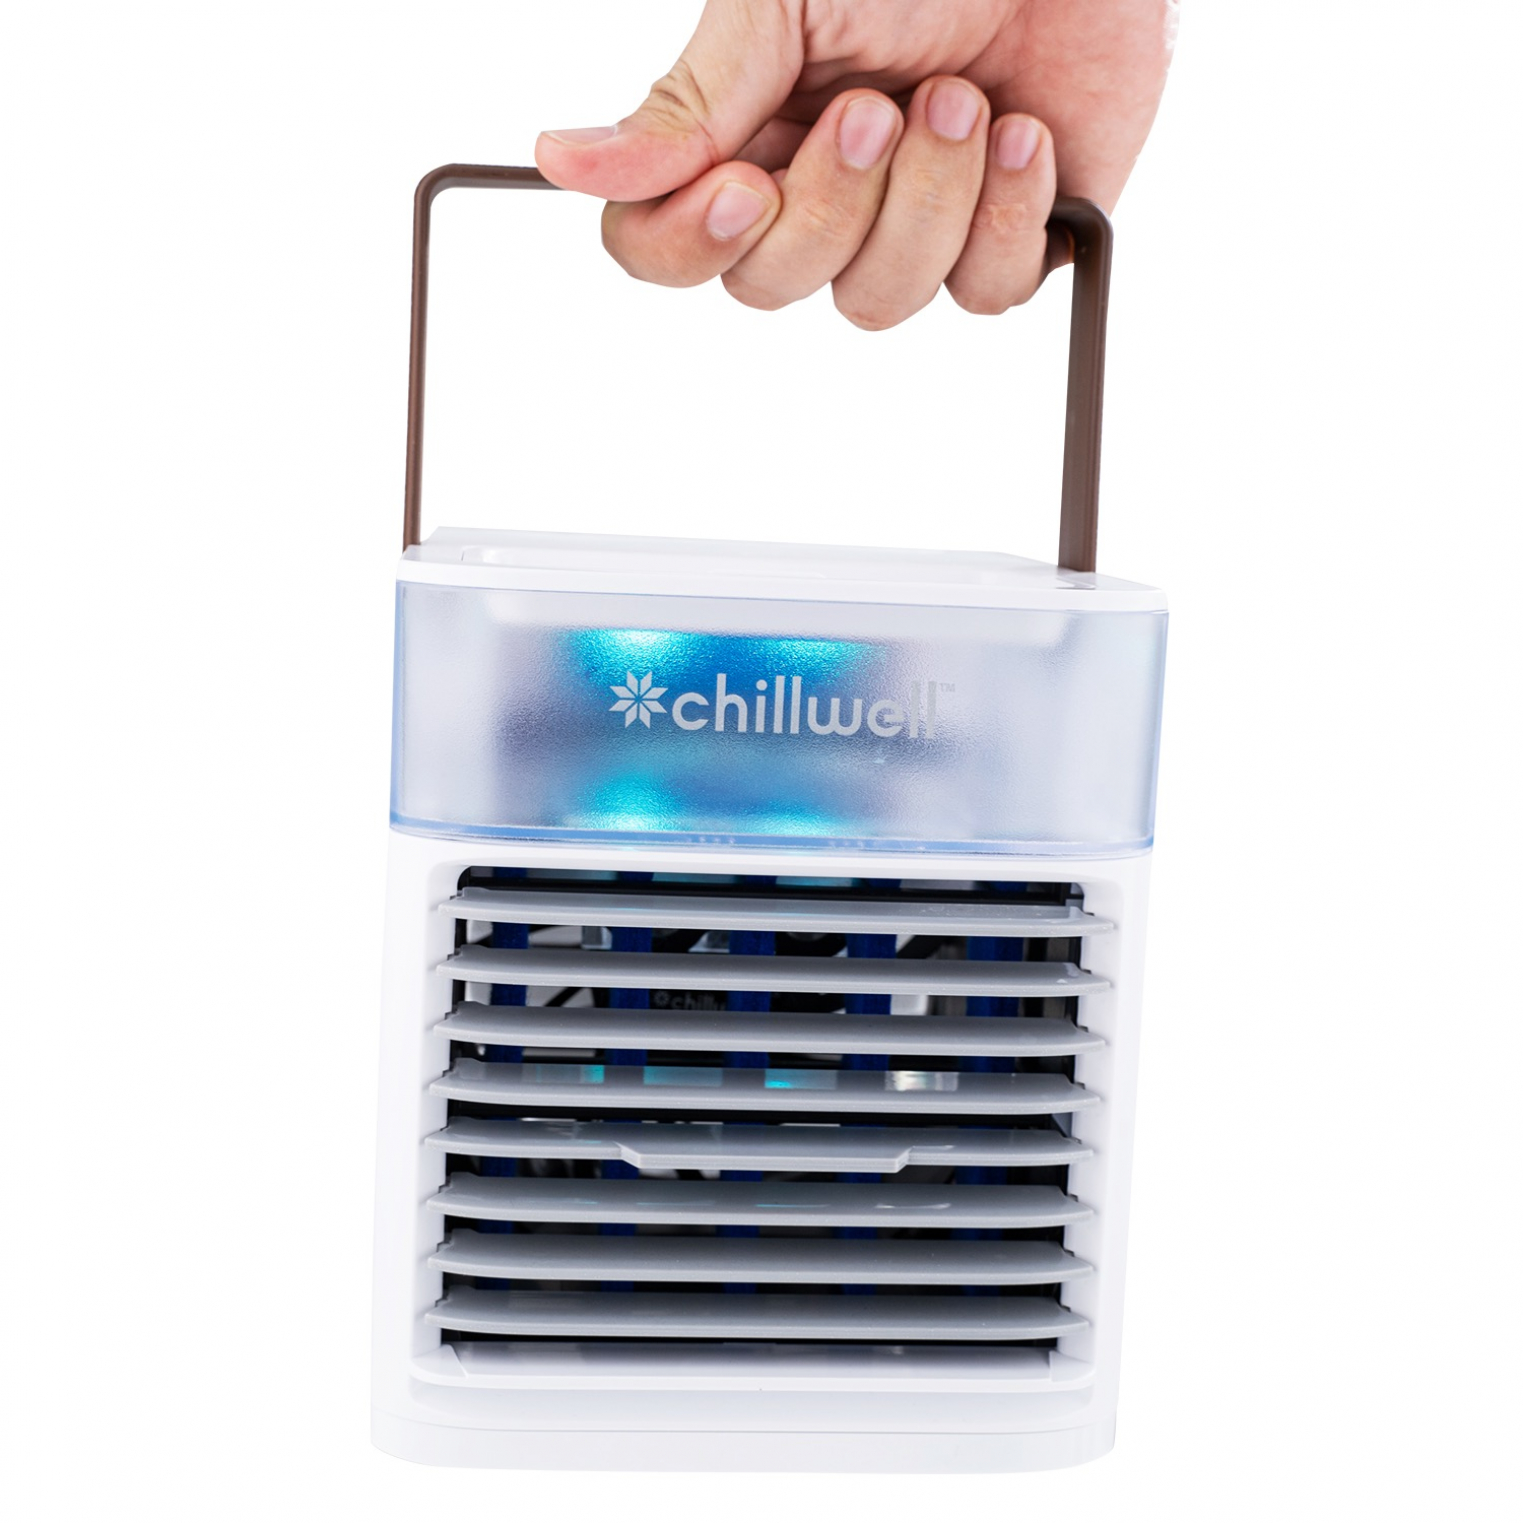 Chillwell Ac Air Cooler